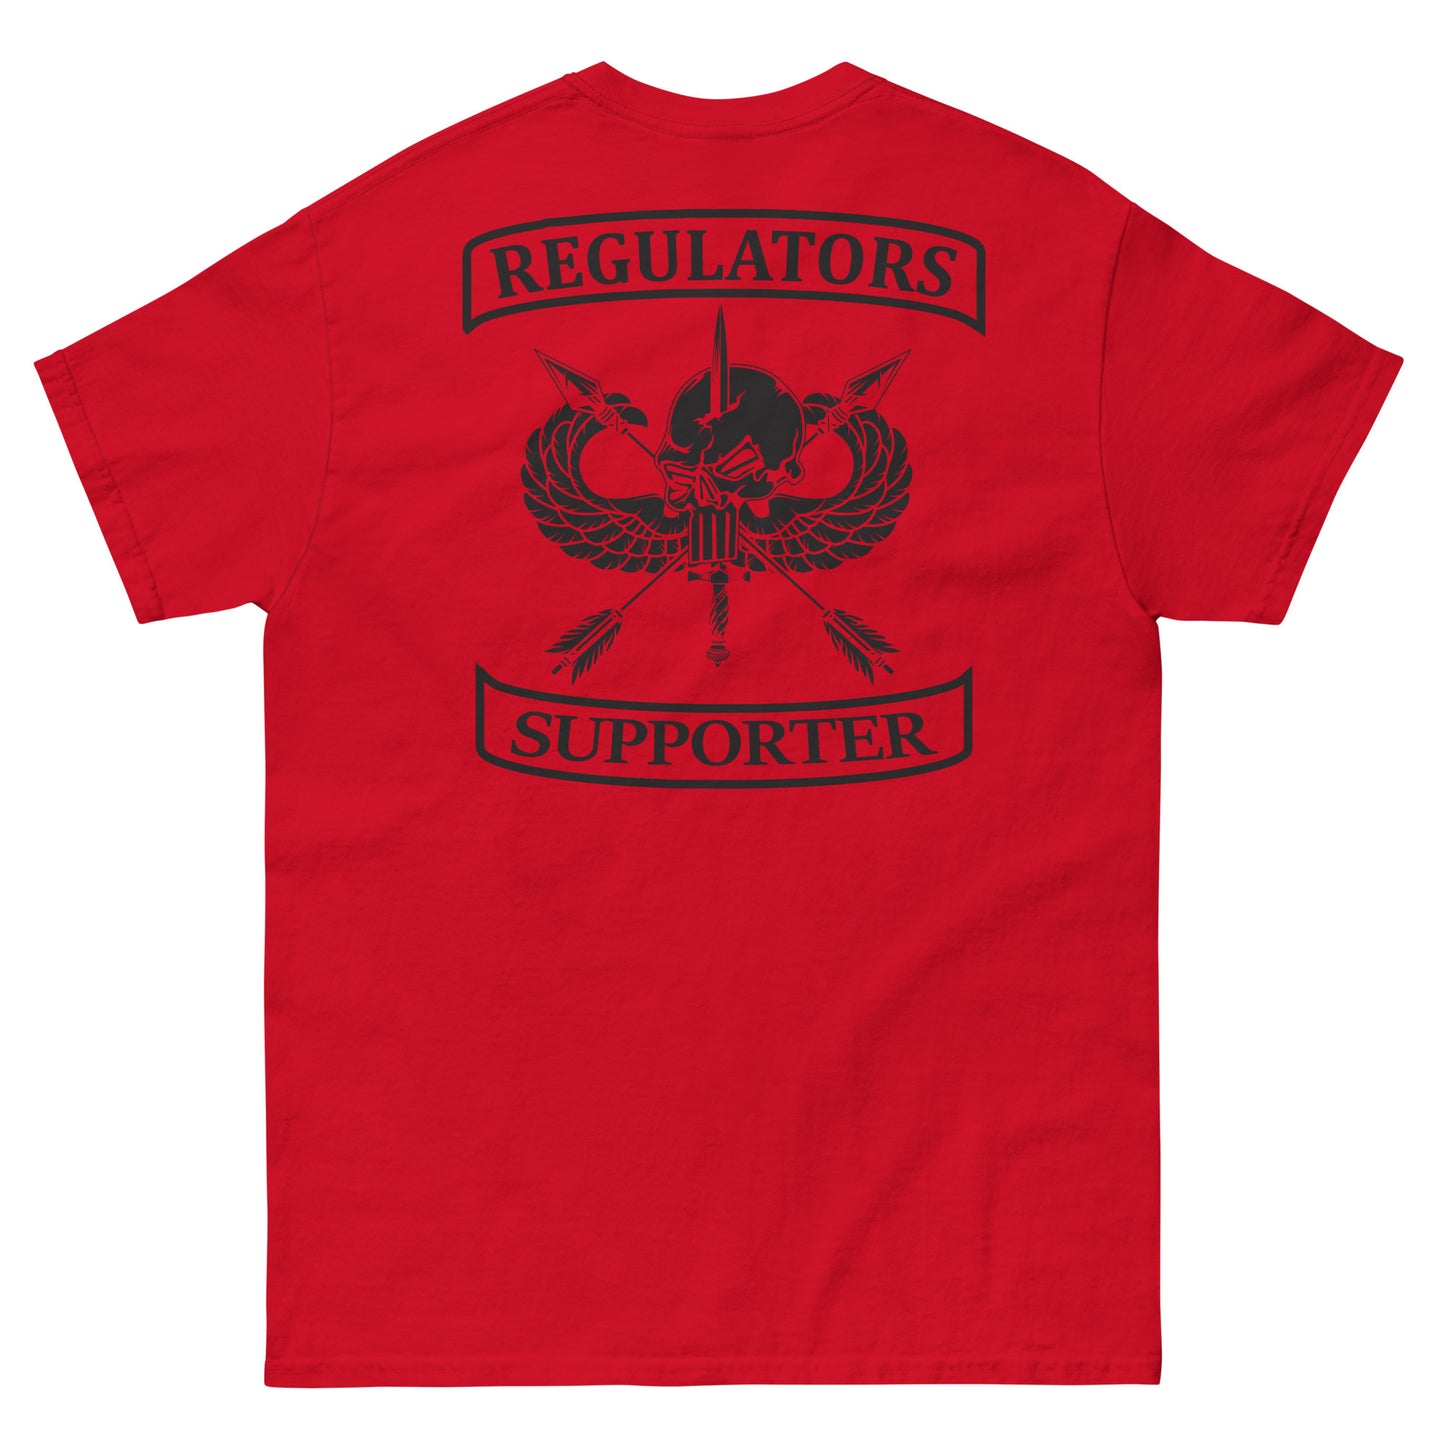 100% COTTON MENS SUPPORTER